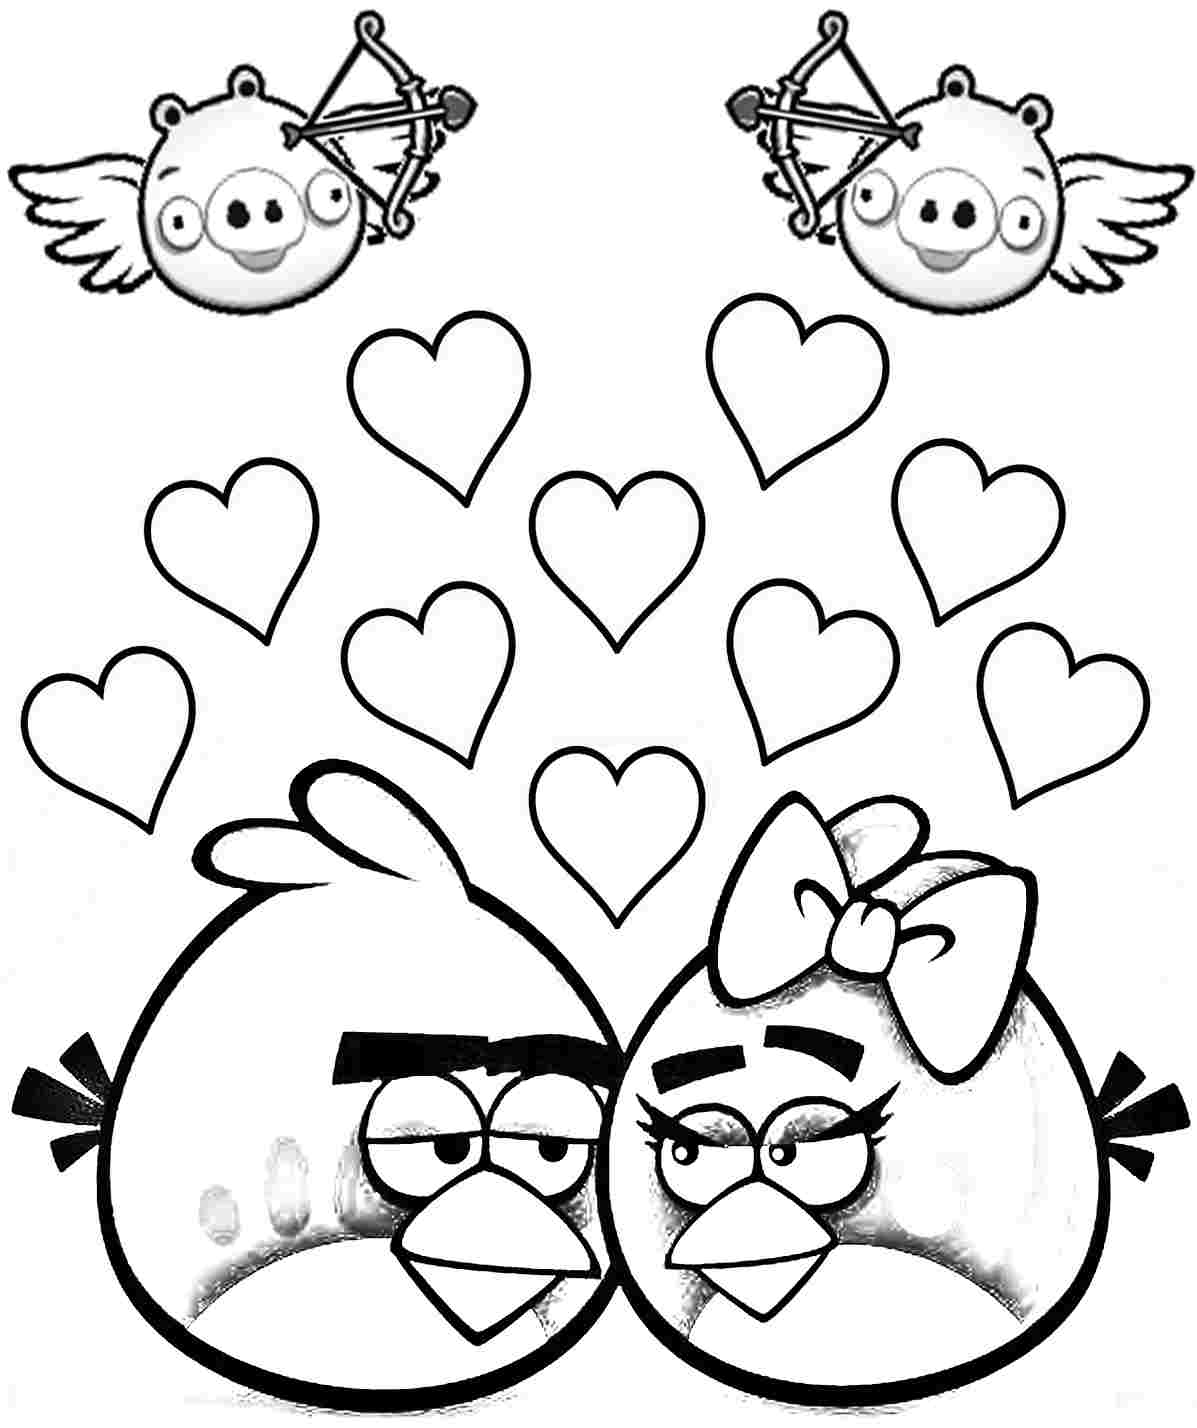 Valentines Day Coloring Pages For Boys at GetColoringscom